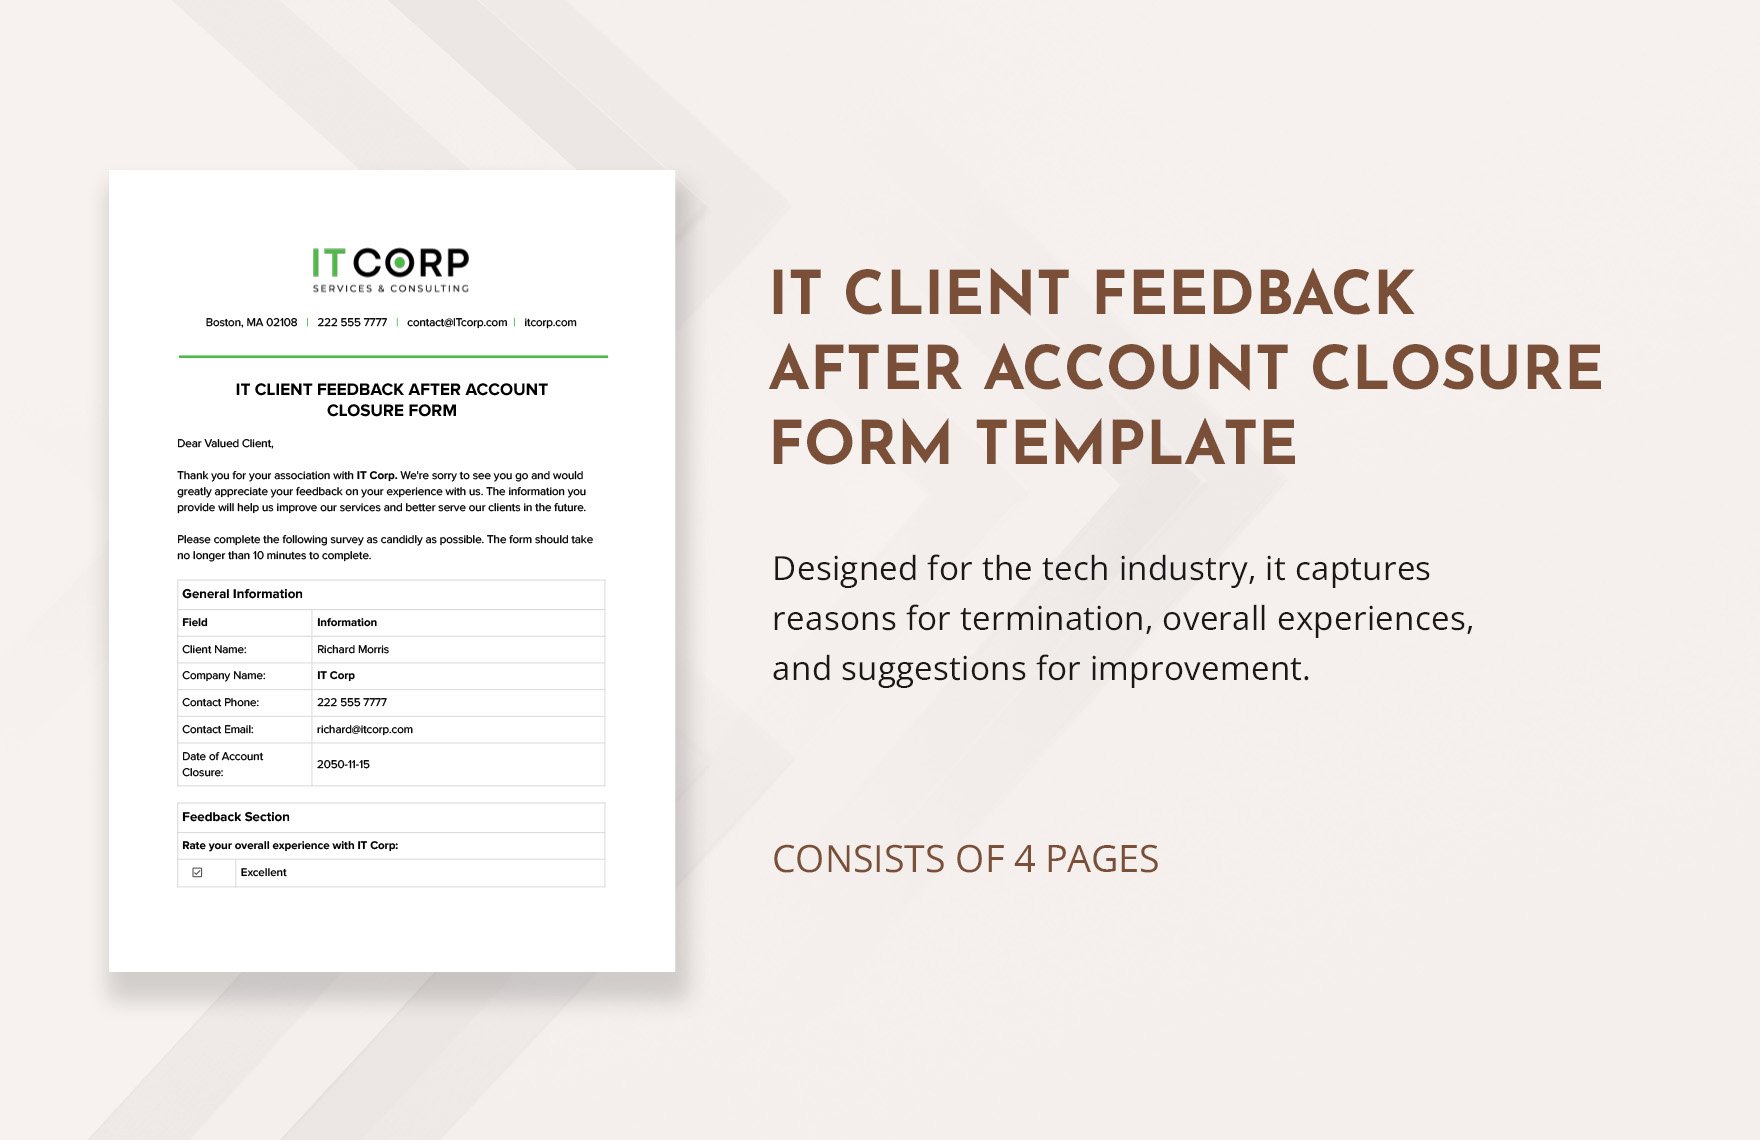 IT Client Feedback after Account Closure Form Template